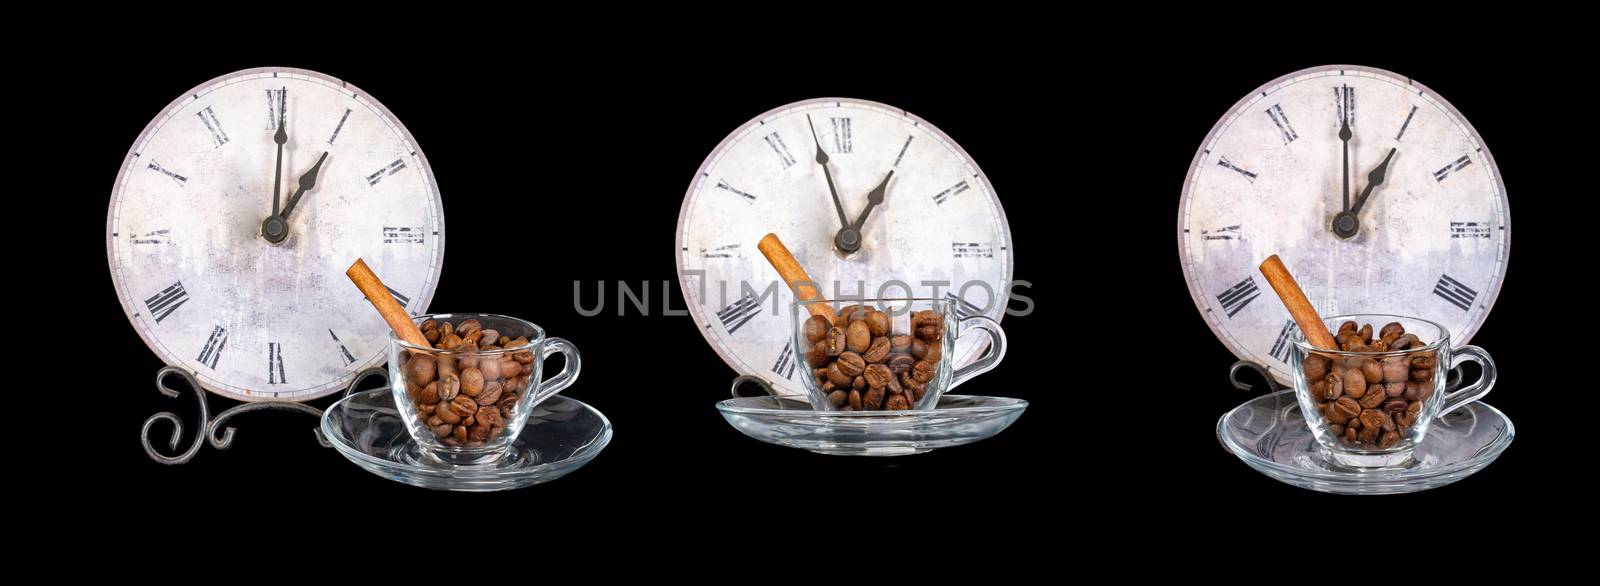 Set of coffee cup with grains isolated on a black background. Coffee beans and vanilla stick in a coffee cup on a saucer.